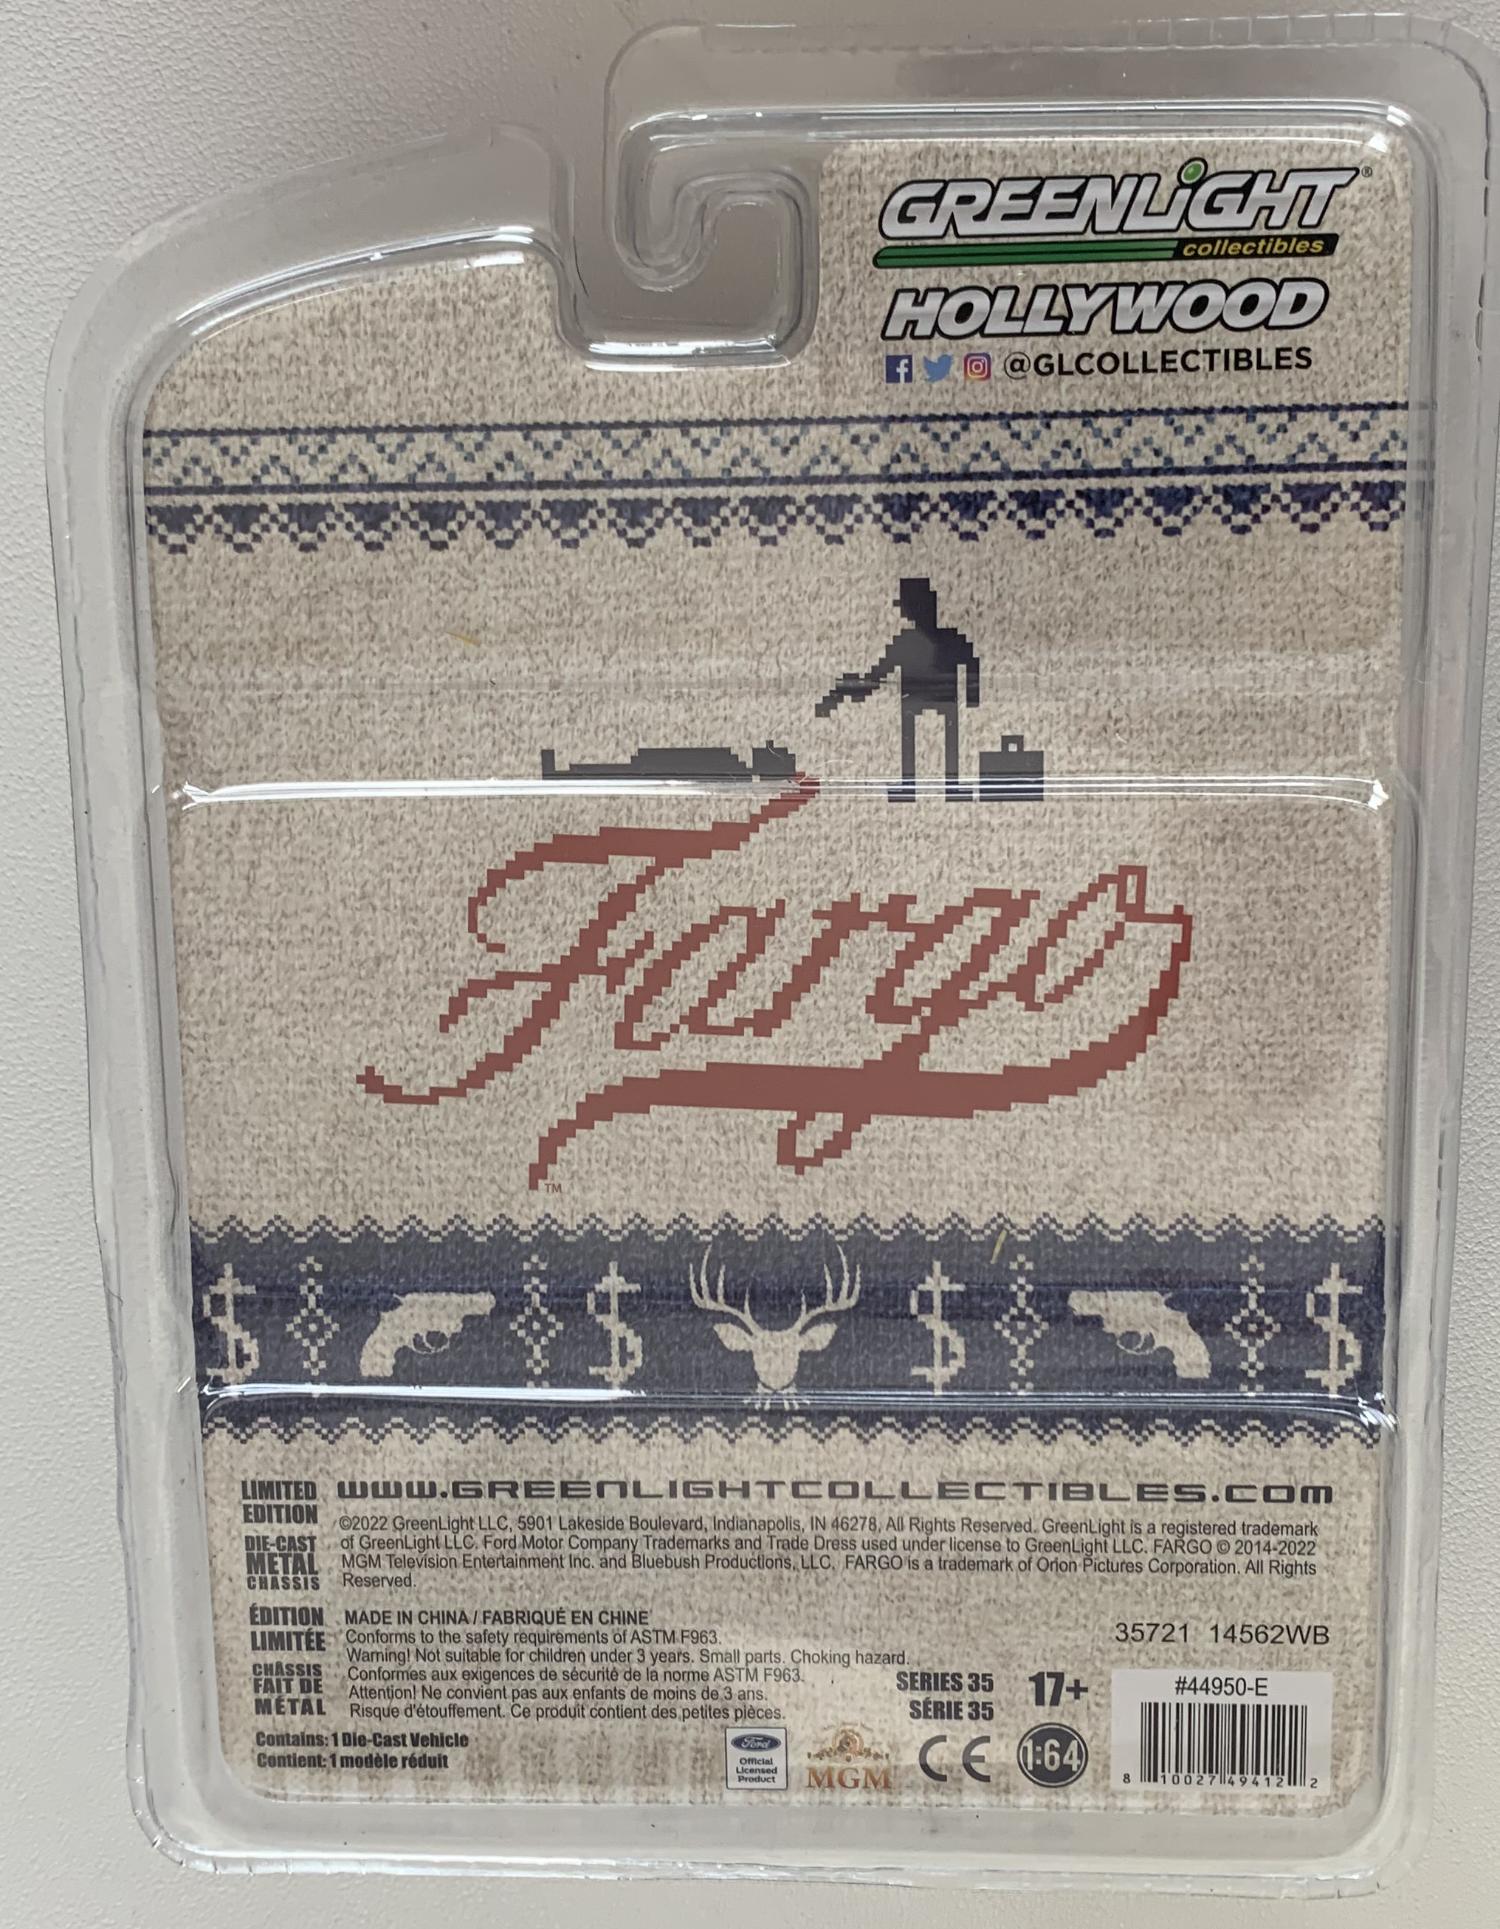 Model is presented in blister packaging in Fargo themed boxed packaging.  Limited Edition model with number on base of the car